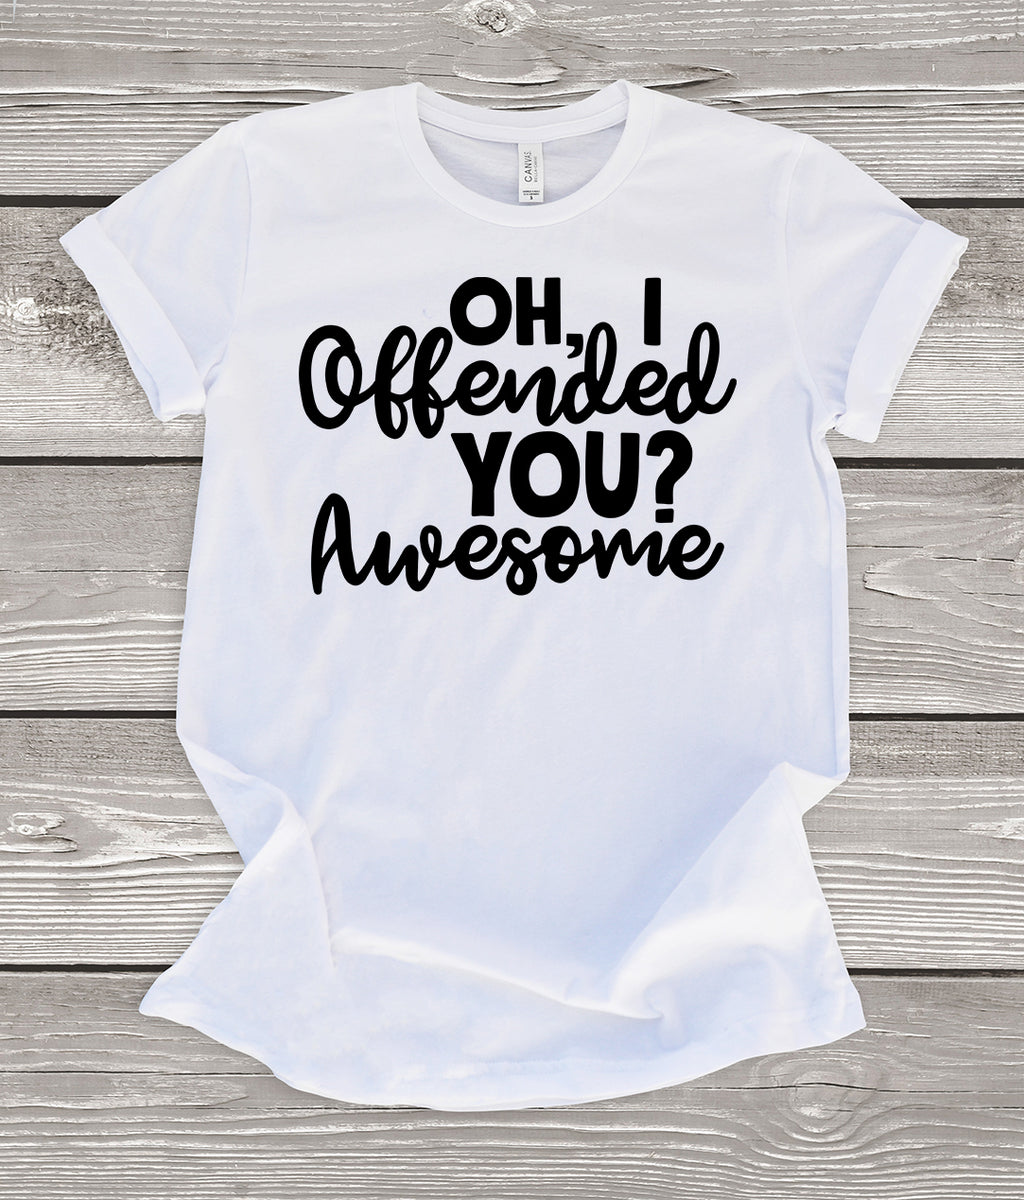 Oh, I Offended You? Awesome White T-Shirt